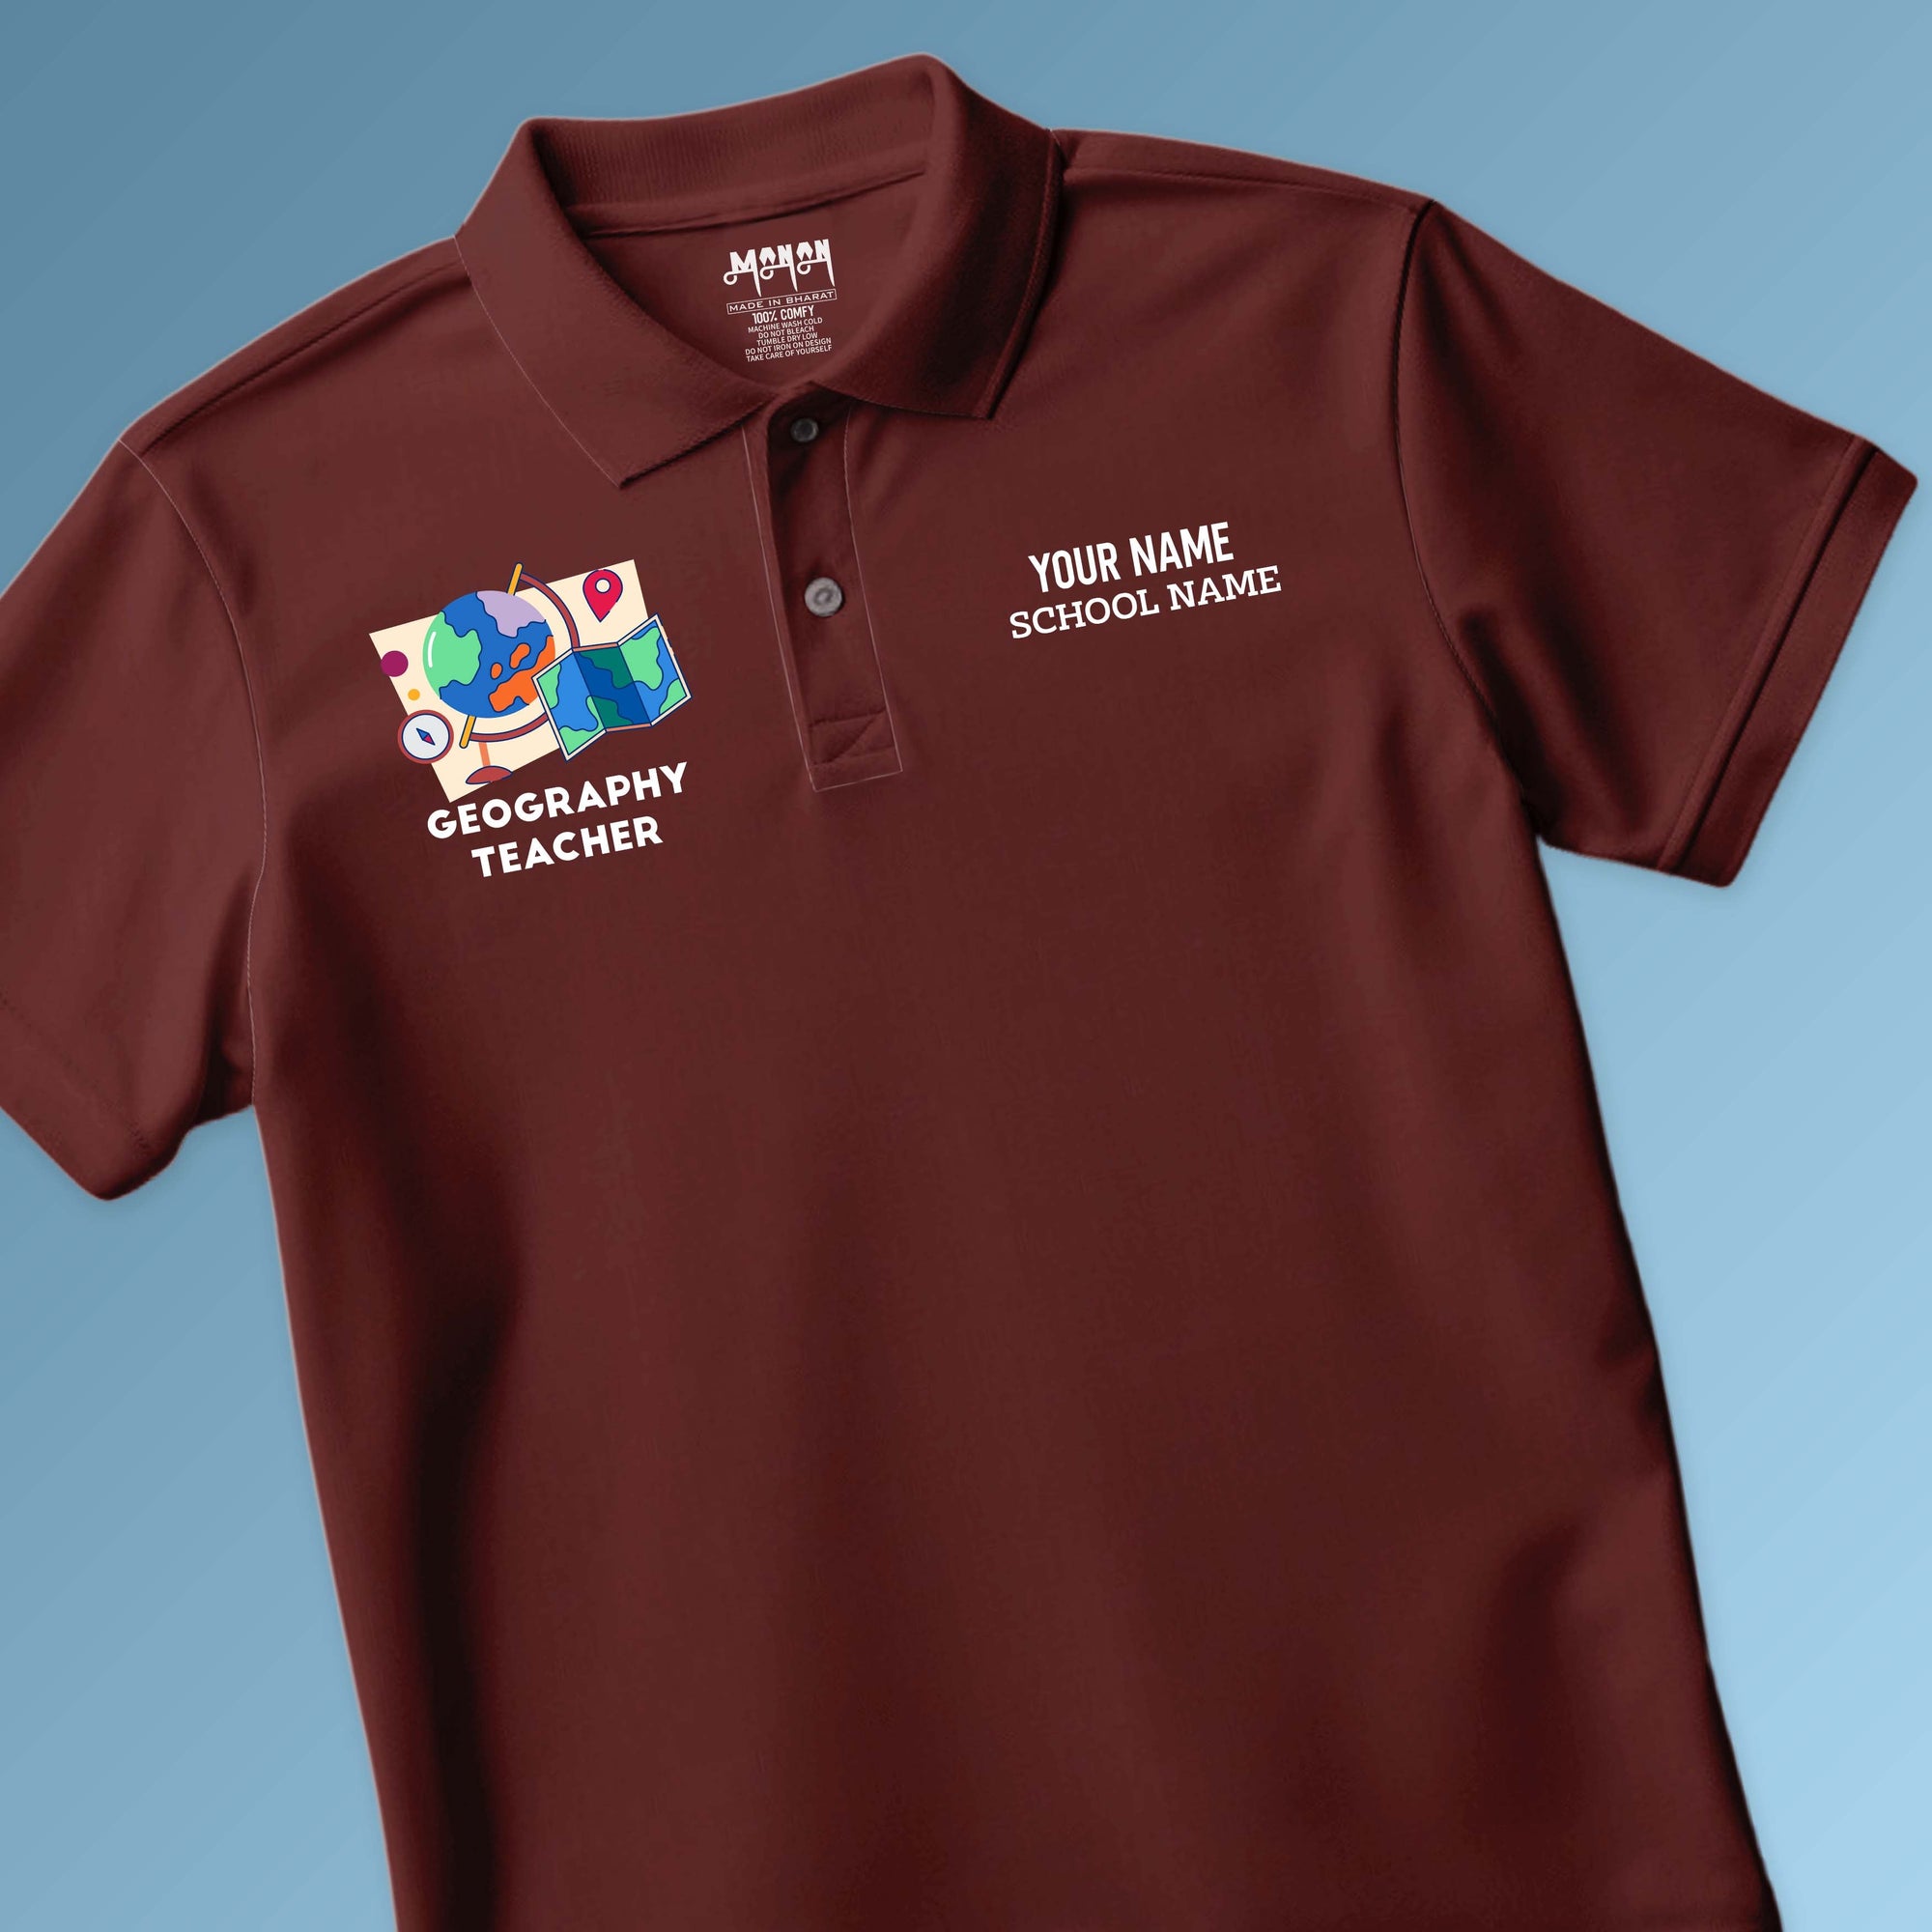 Geography Teacher - Personalized Unisex Polo T-shirt